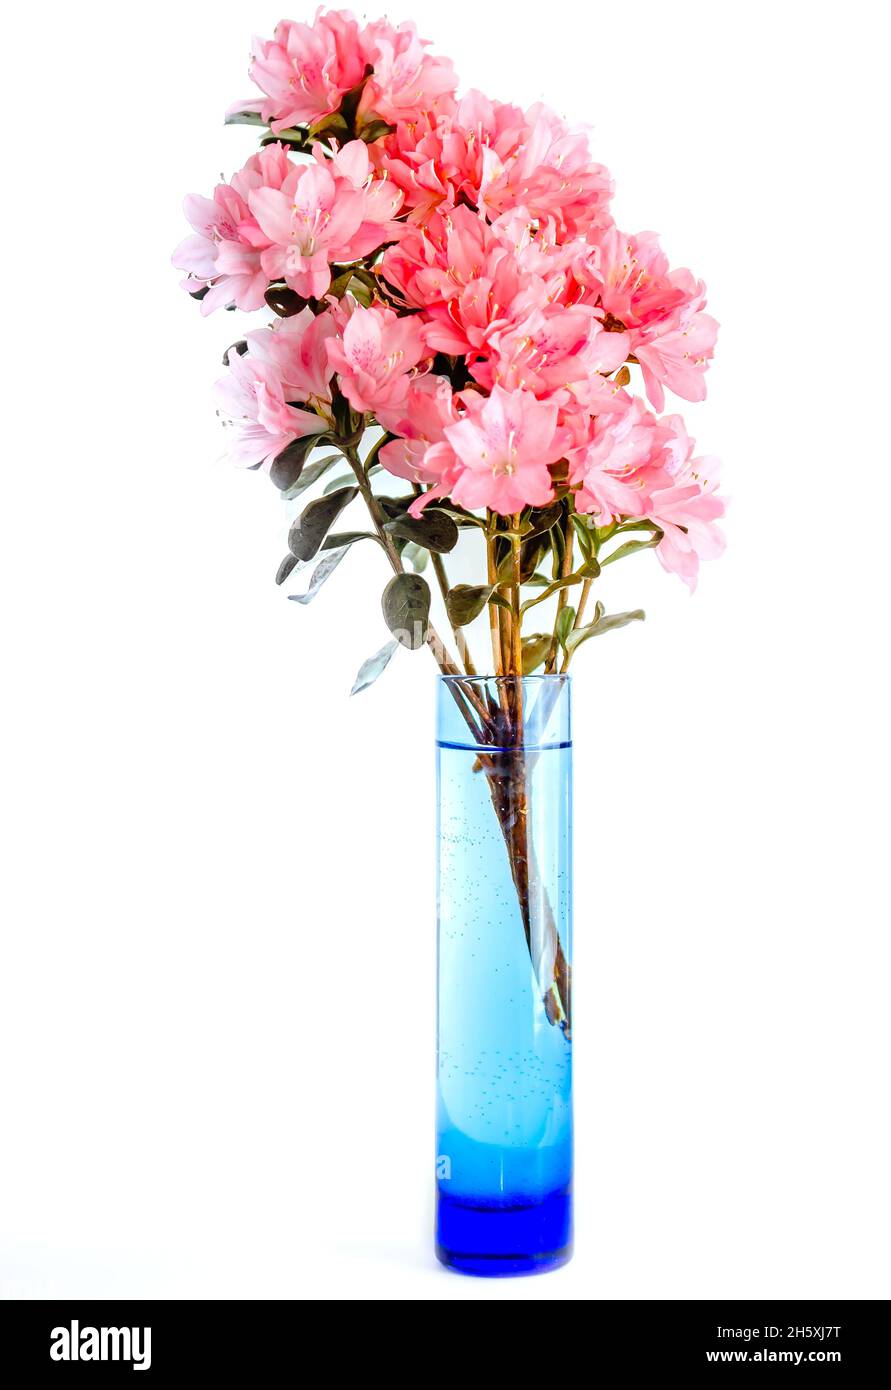 Southern Indian azaleas (Rhododendron indicum) are displayed in a blue vase, April 8, 2014, in Mobile, Alabama. Stock Photo